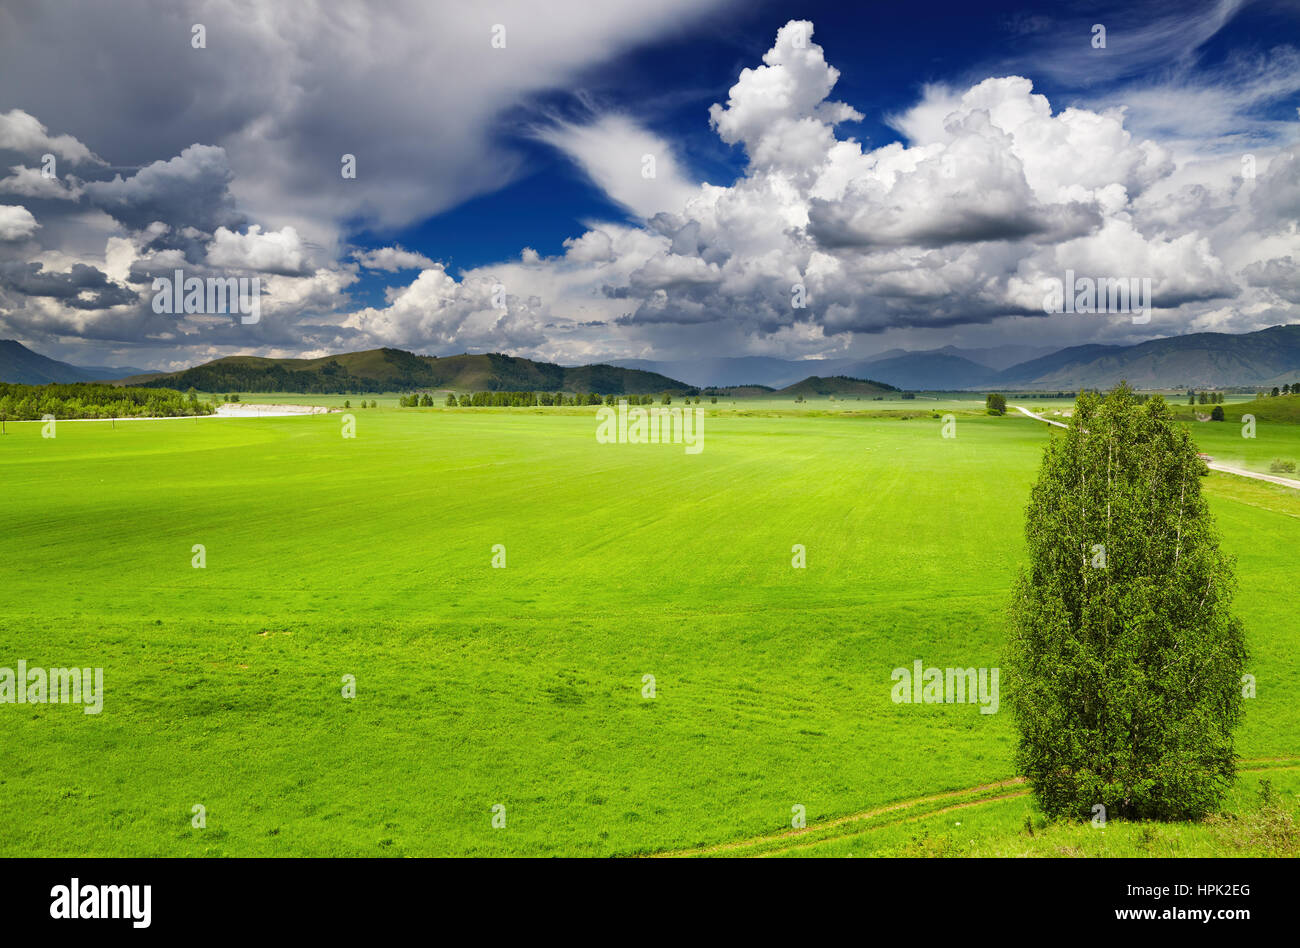 Landscape with green field and cloudy sky Stock Photo